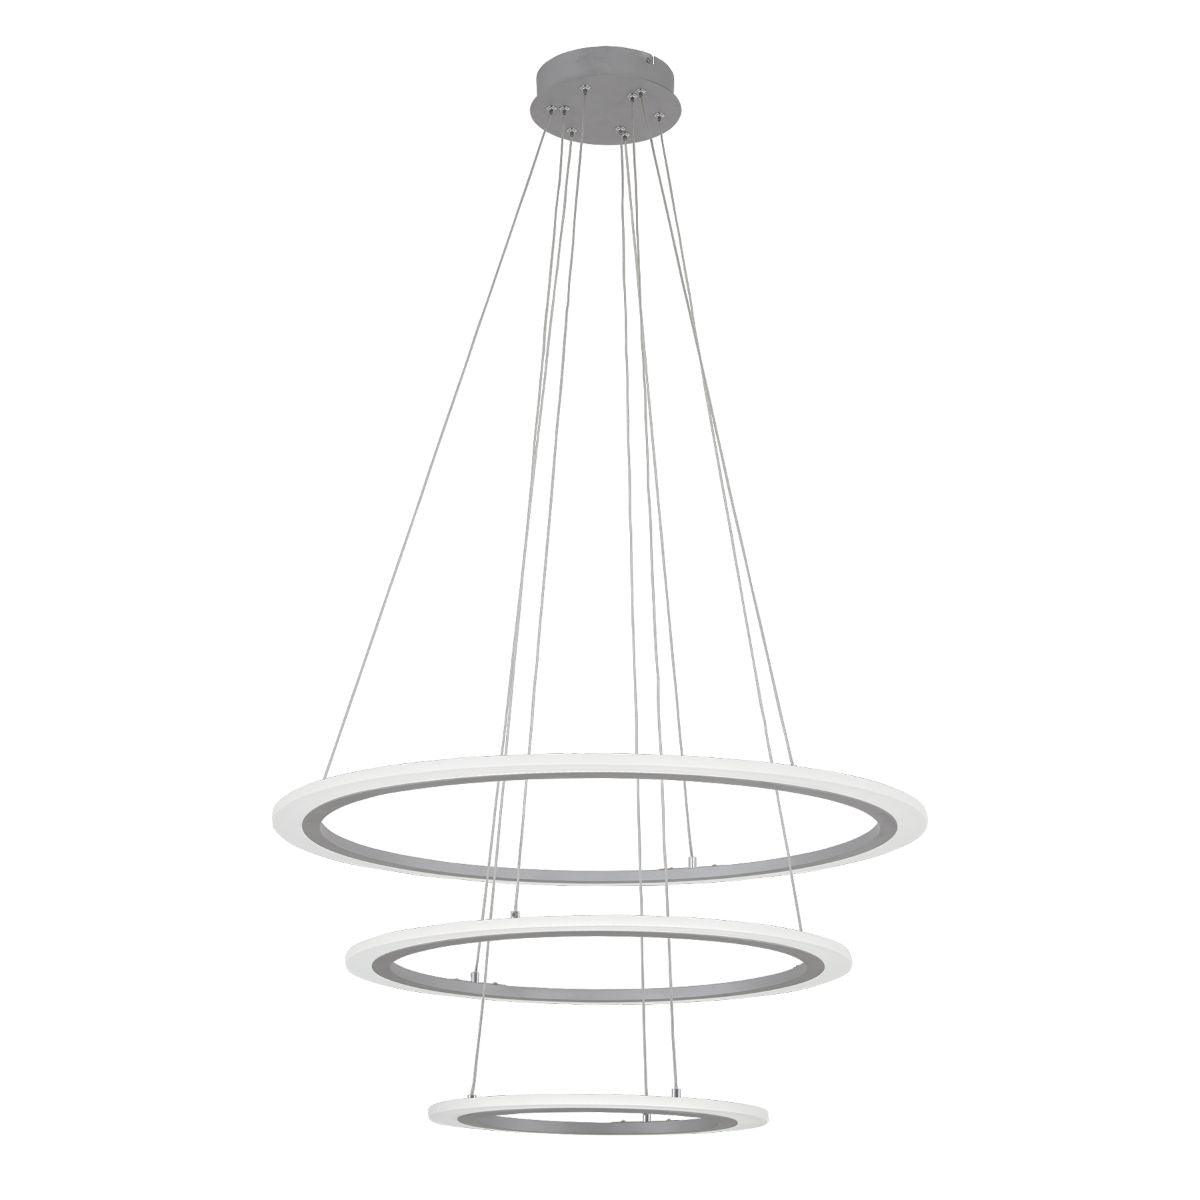 Discovery 31 in. LED Pendant Light Silver finish